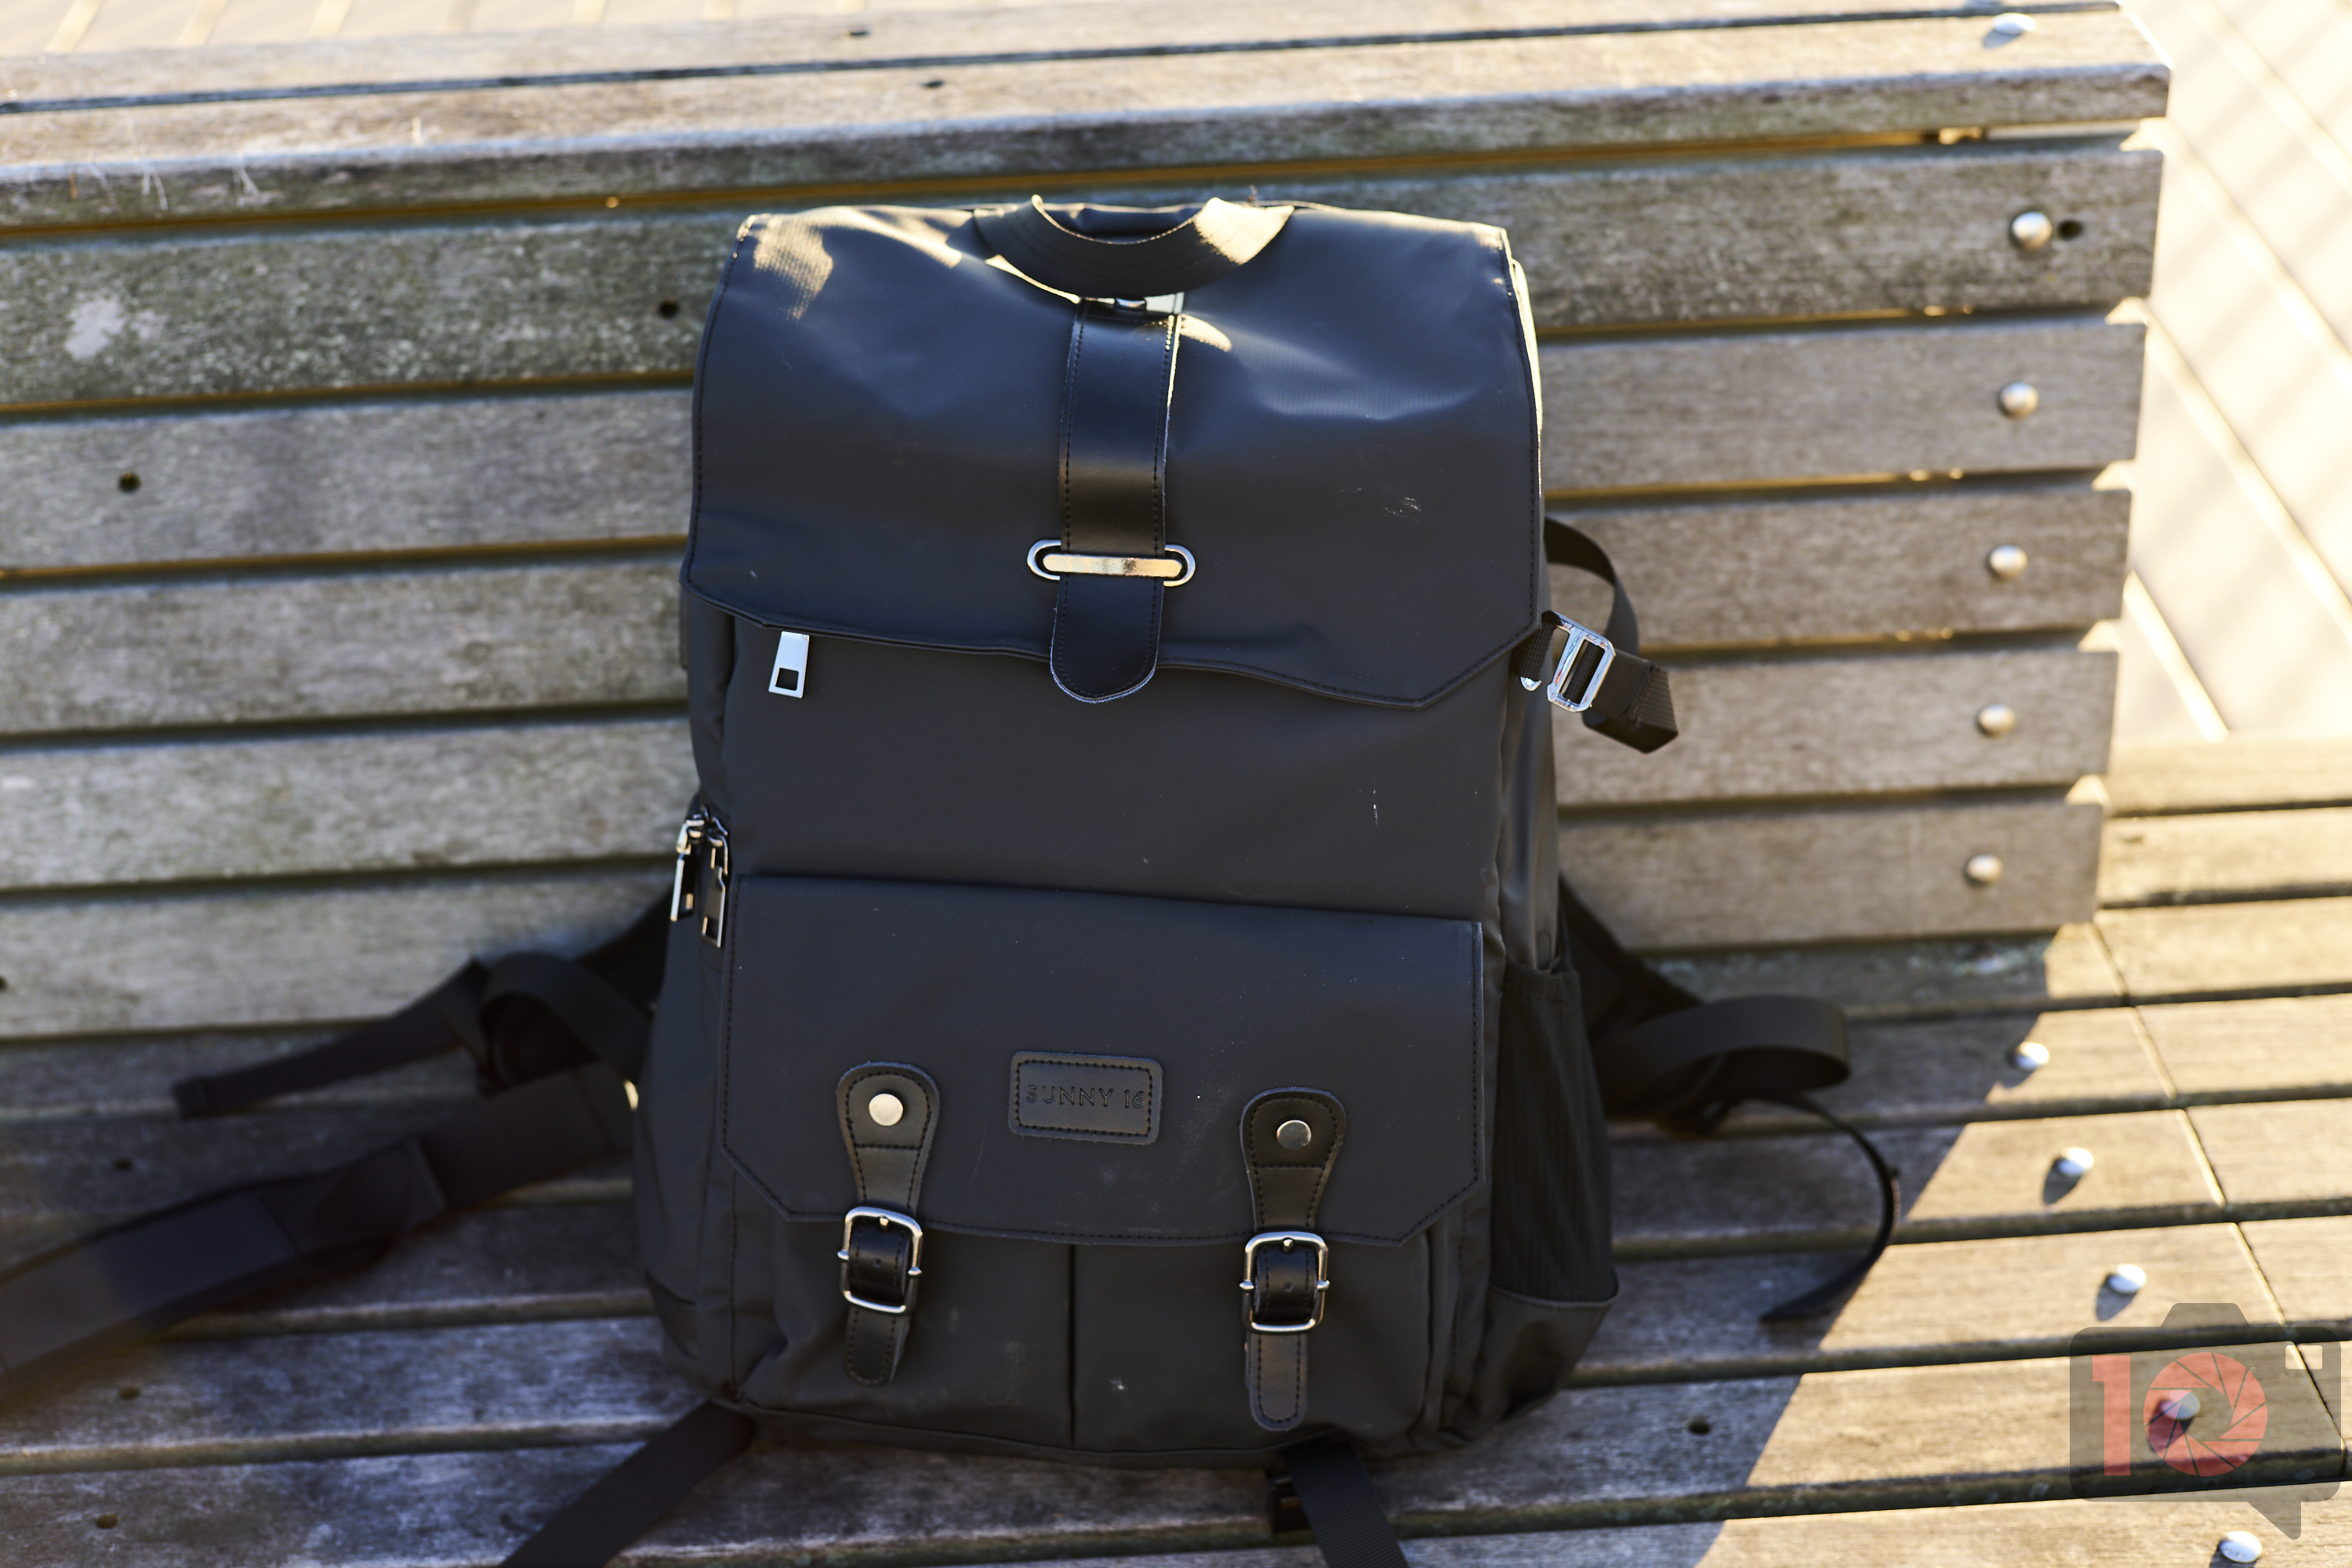 Chris Gampat The Phoblographer Sunny 16 Voyager Backpack Review product images 3.41-250s400